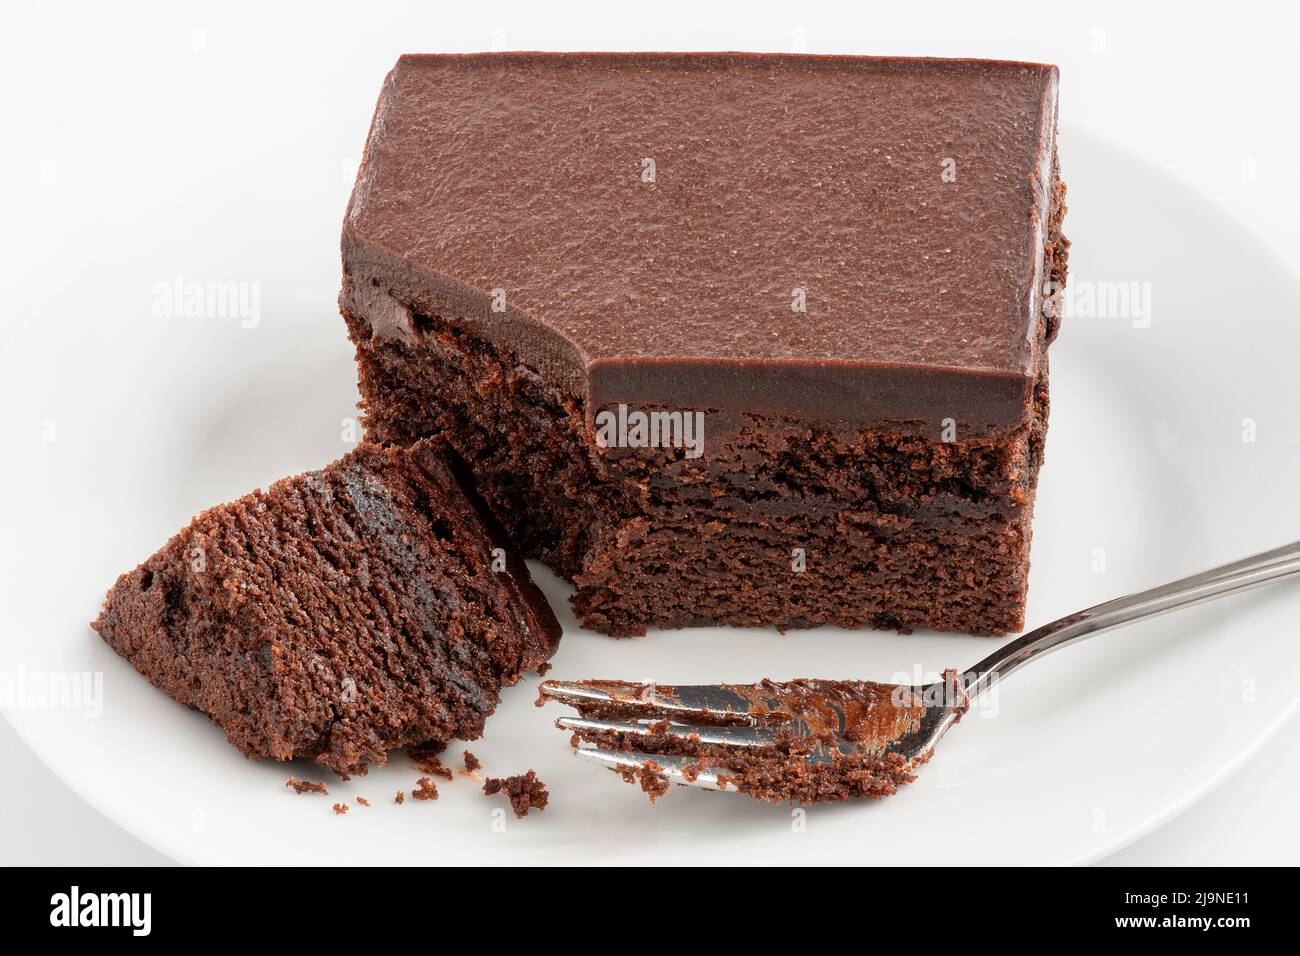 Chocolate cake square with chocolate icing next to fork on white plate. Broken with crumbs. Stock Photo